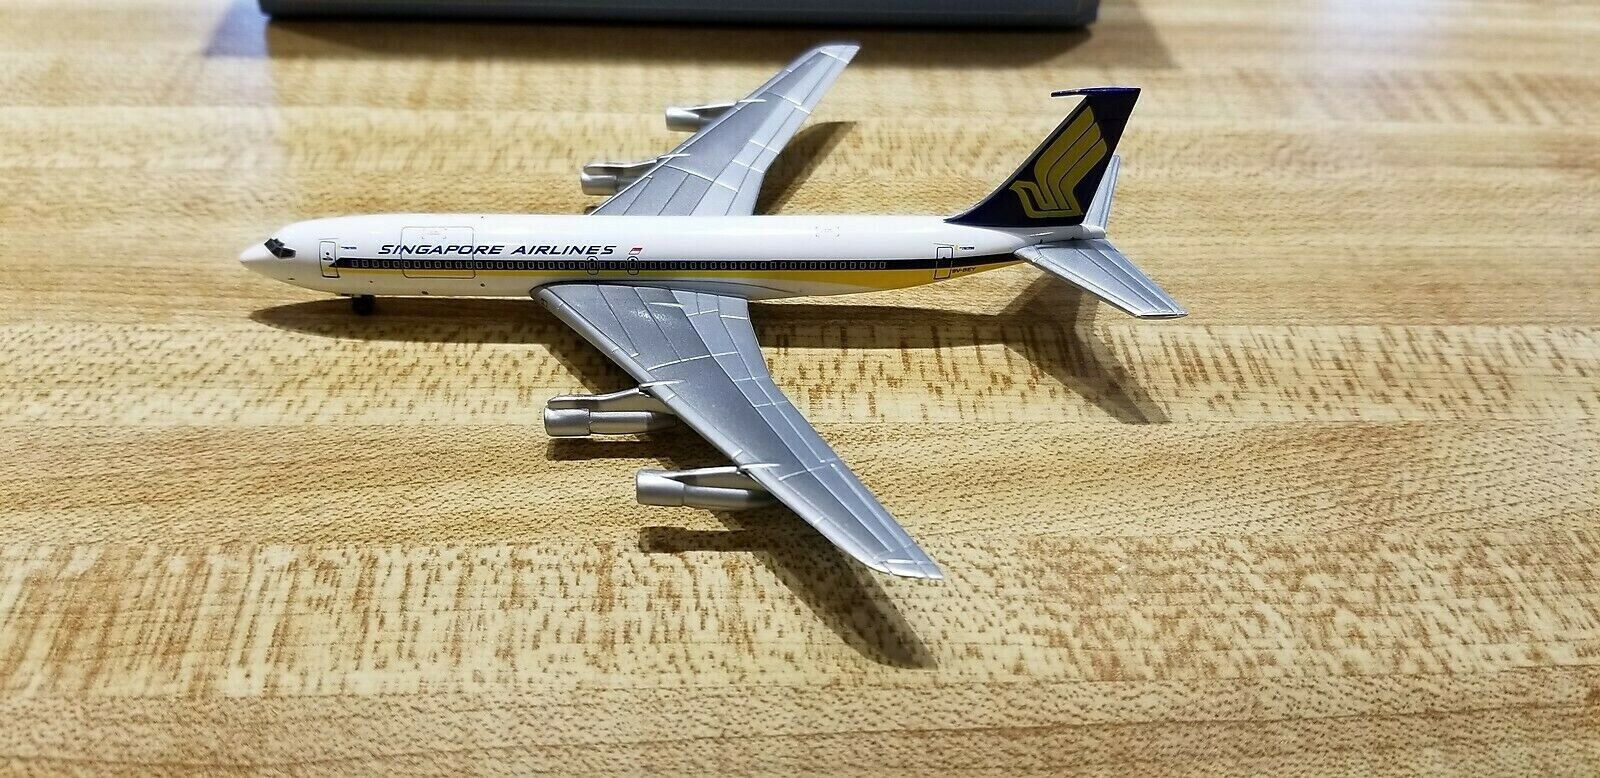 Dragon Wings Singapore Airlines B 707-324C 1:400 55809 1980s Colors 9V-BEY